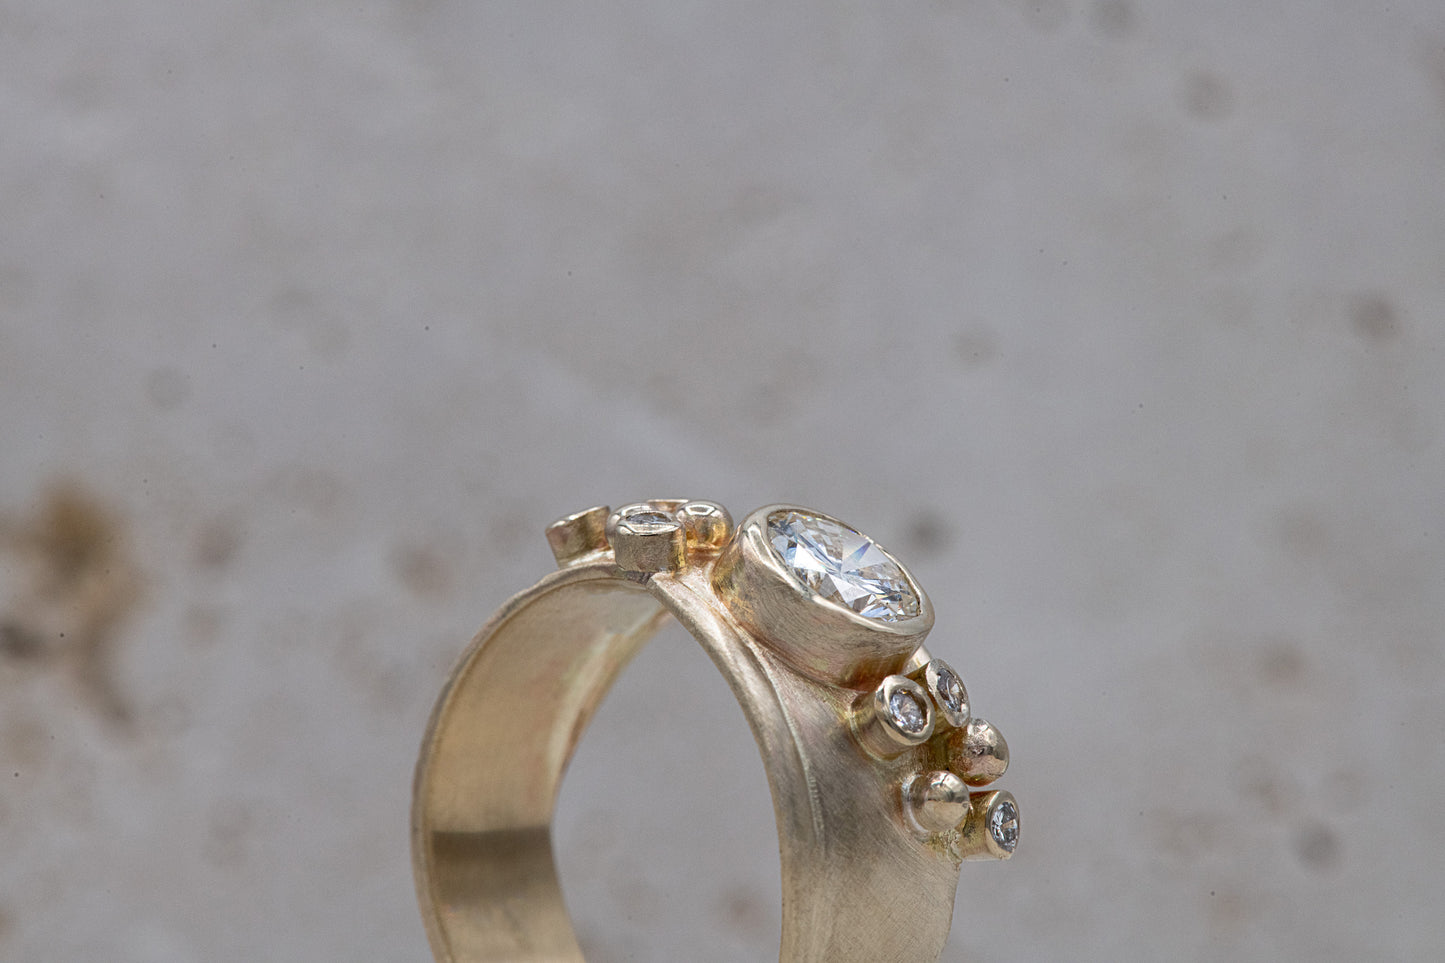 A Wide Forever One Moissanite Gold Ring with a diamond in the center, handmade by Cassin Jewelry.